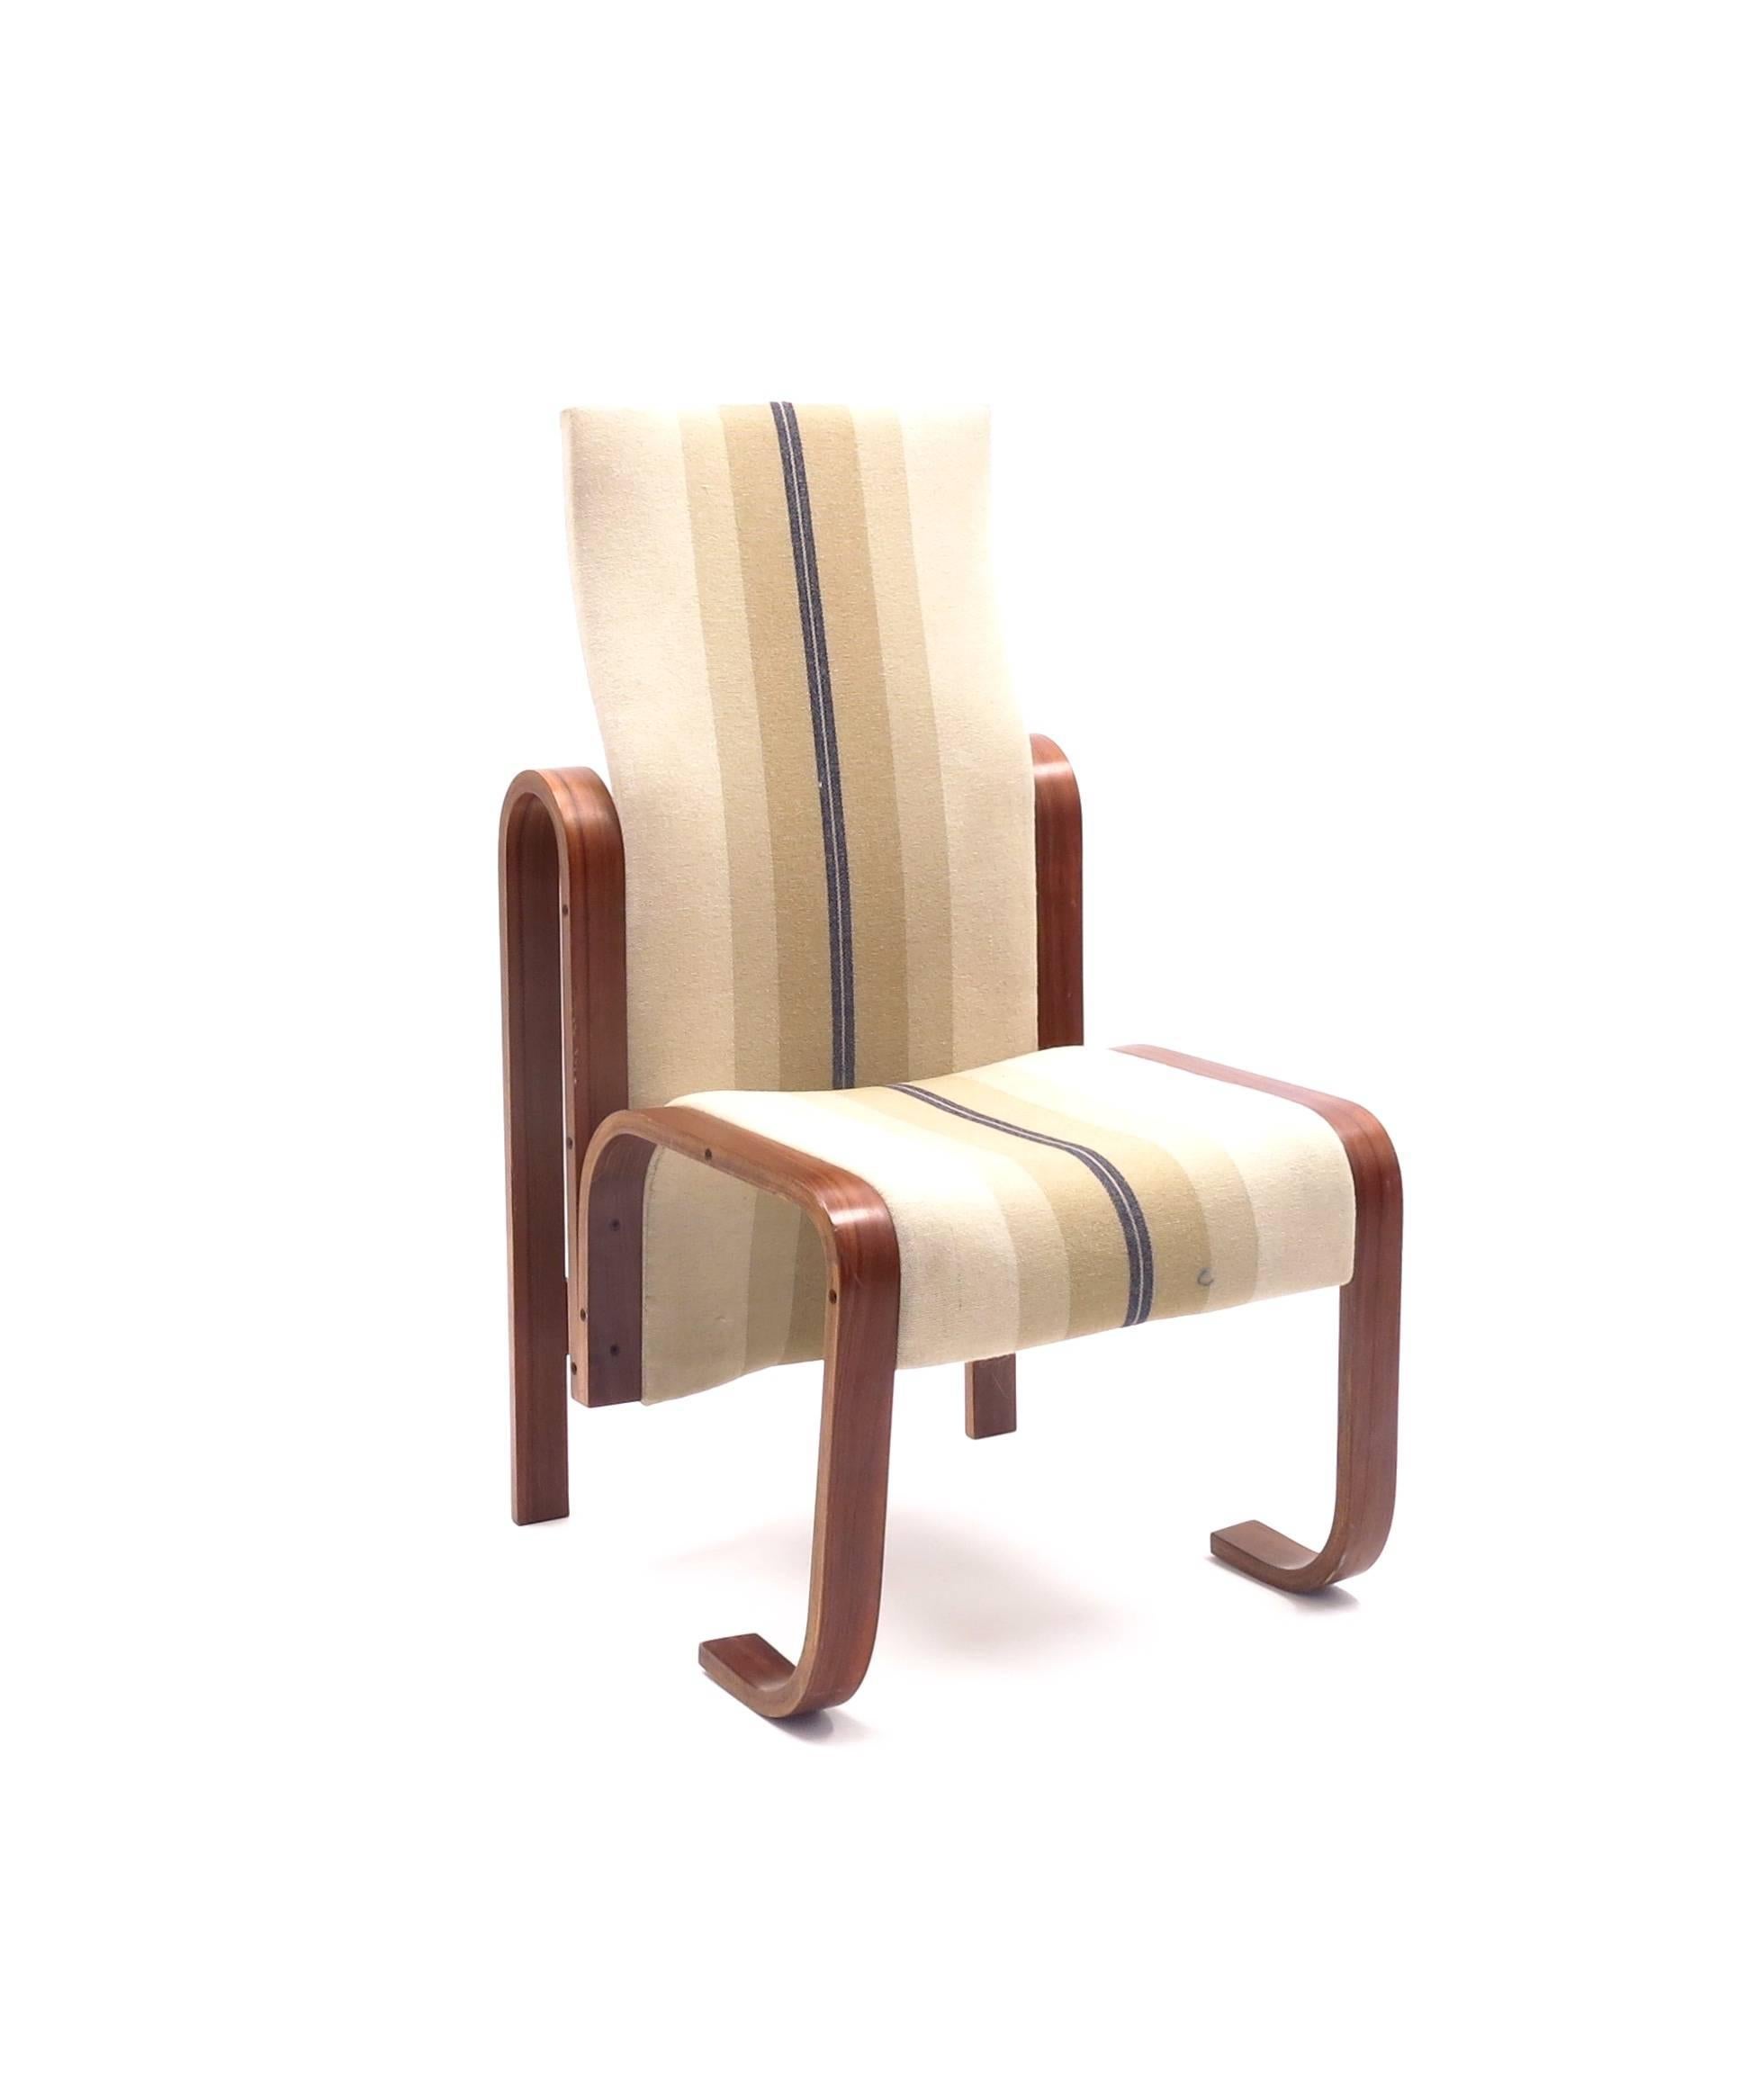 This chair was designed by Jan Bocan, the award-winning architect behind the Czechoslovakian embassy in Stockholm that was built in the late 1960s and early 1970s. He also designed the furniture, including this high back chair. This model has never